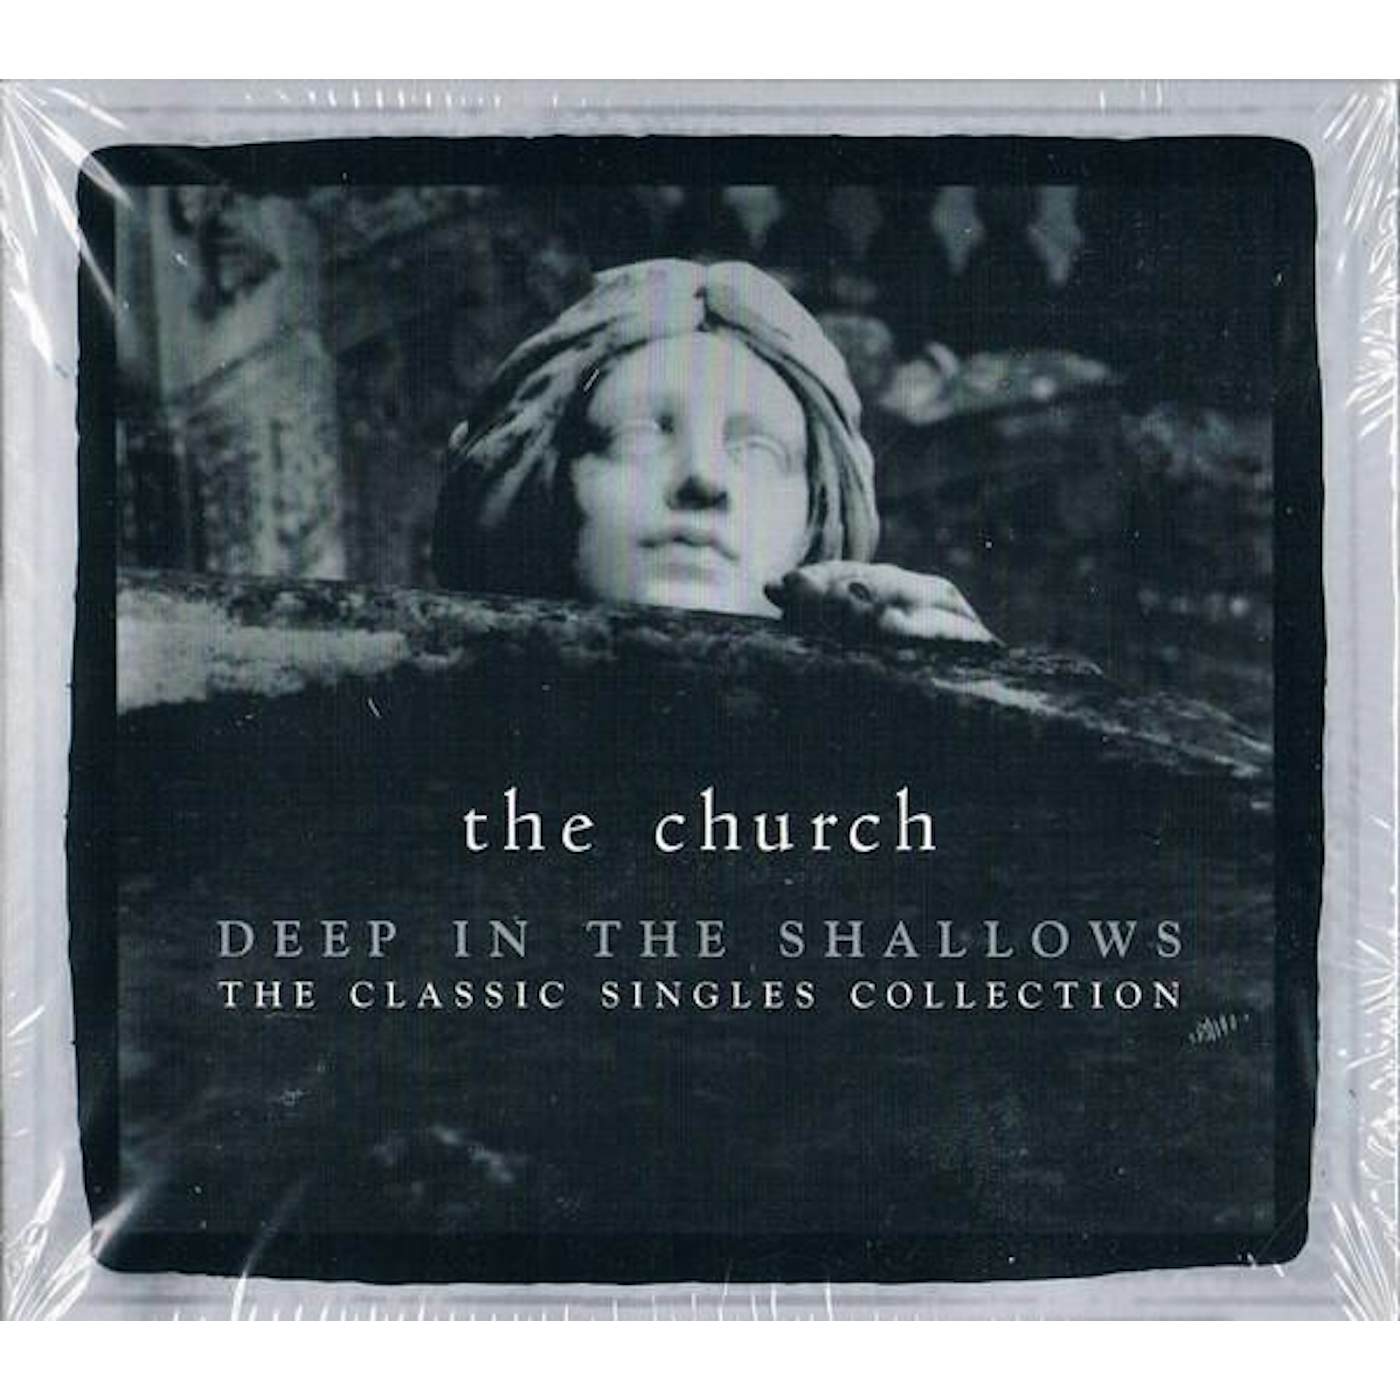 The Church DEEP IN THE SHALLOWS: 30TH ANNIVERSARY SINGLES COLLECTION CD